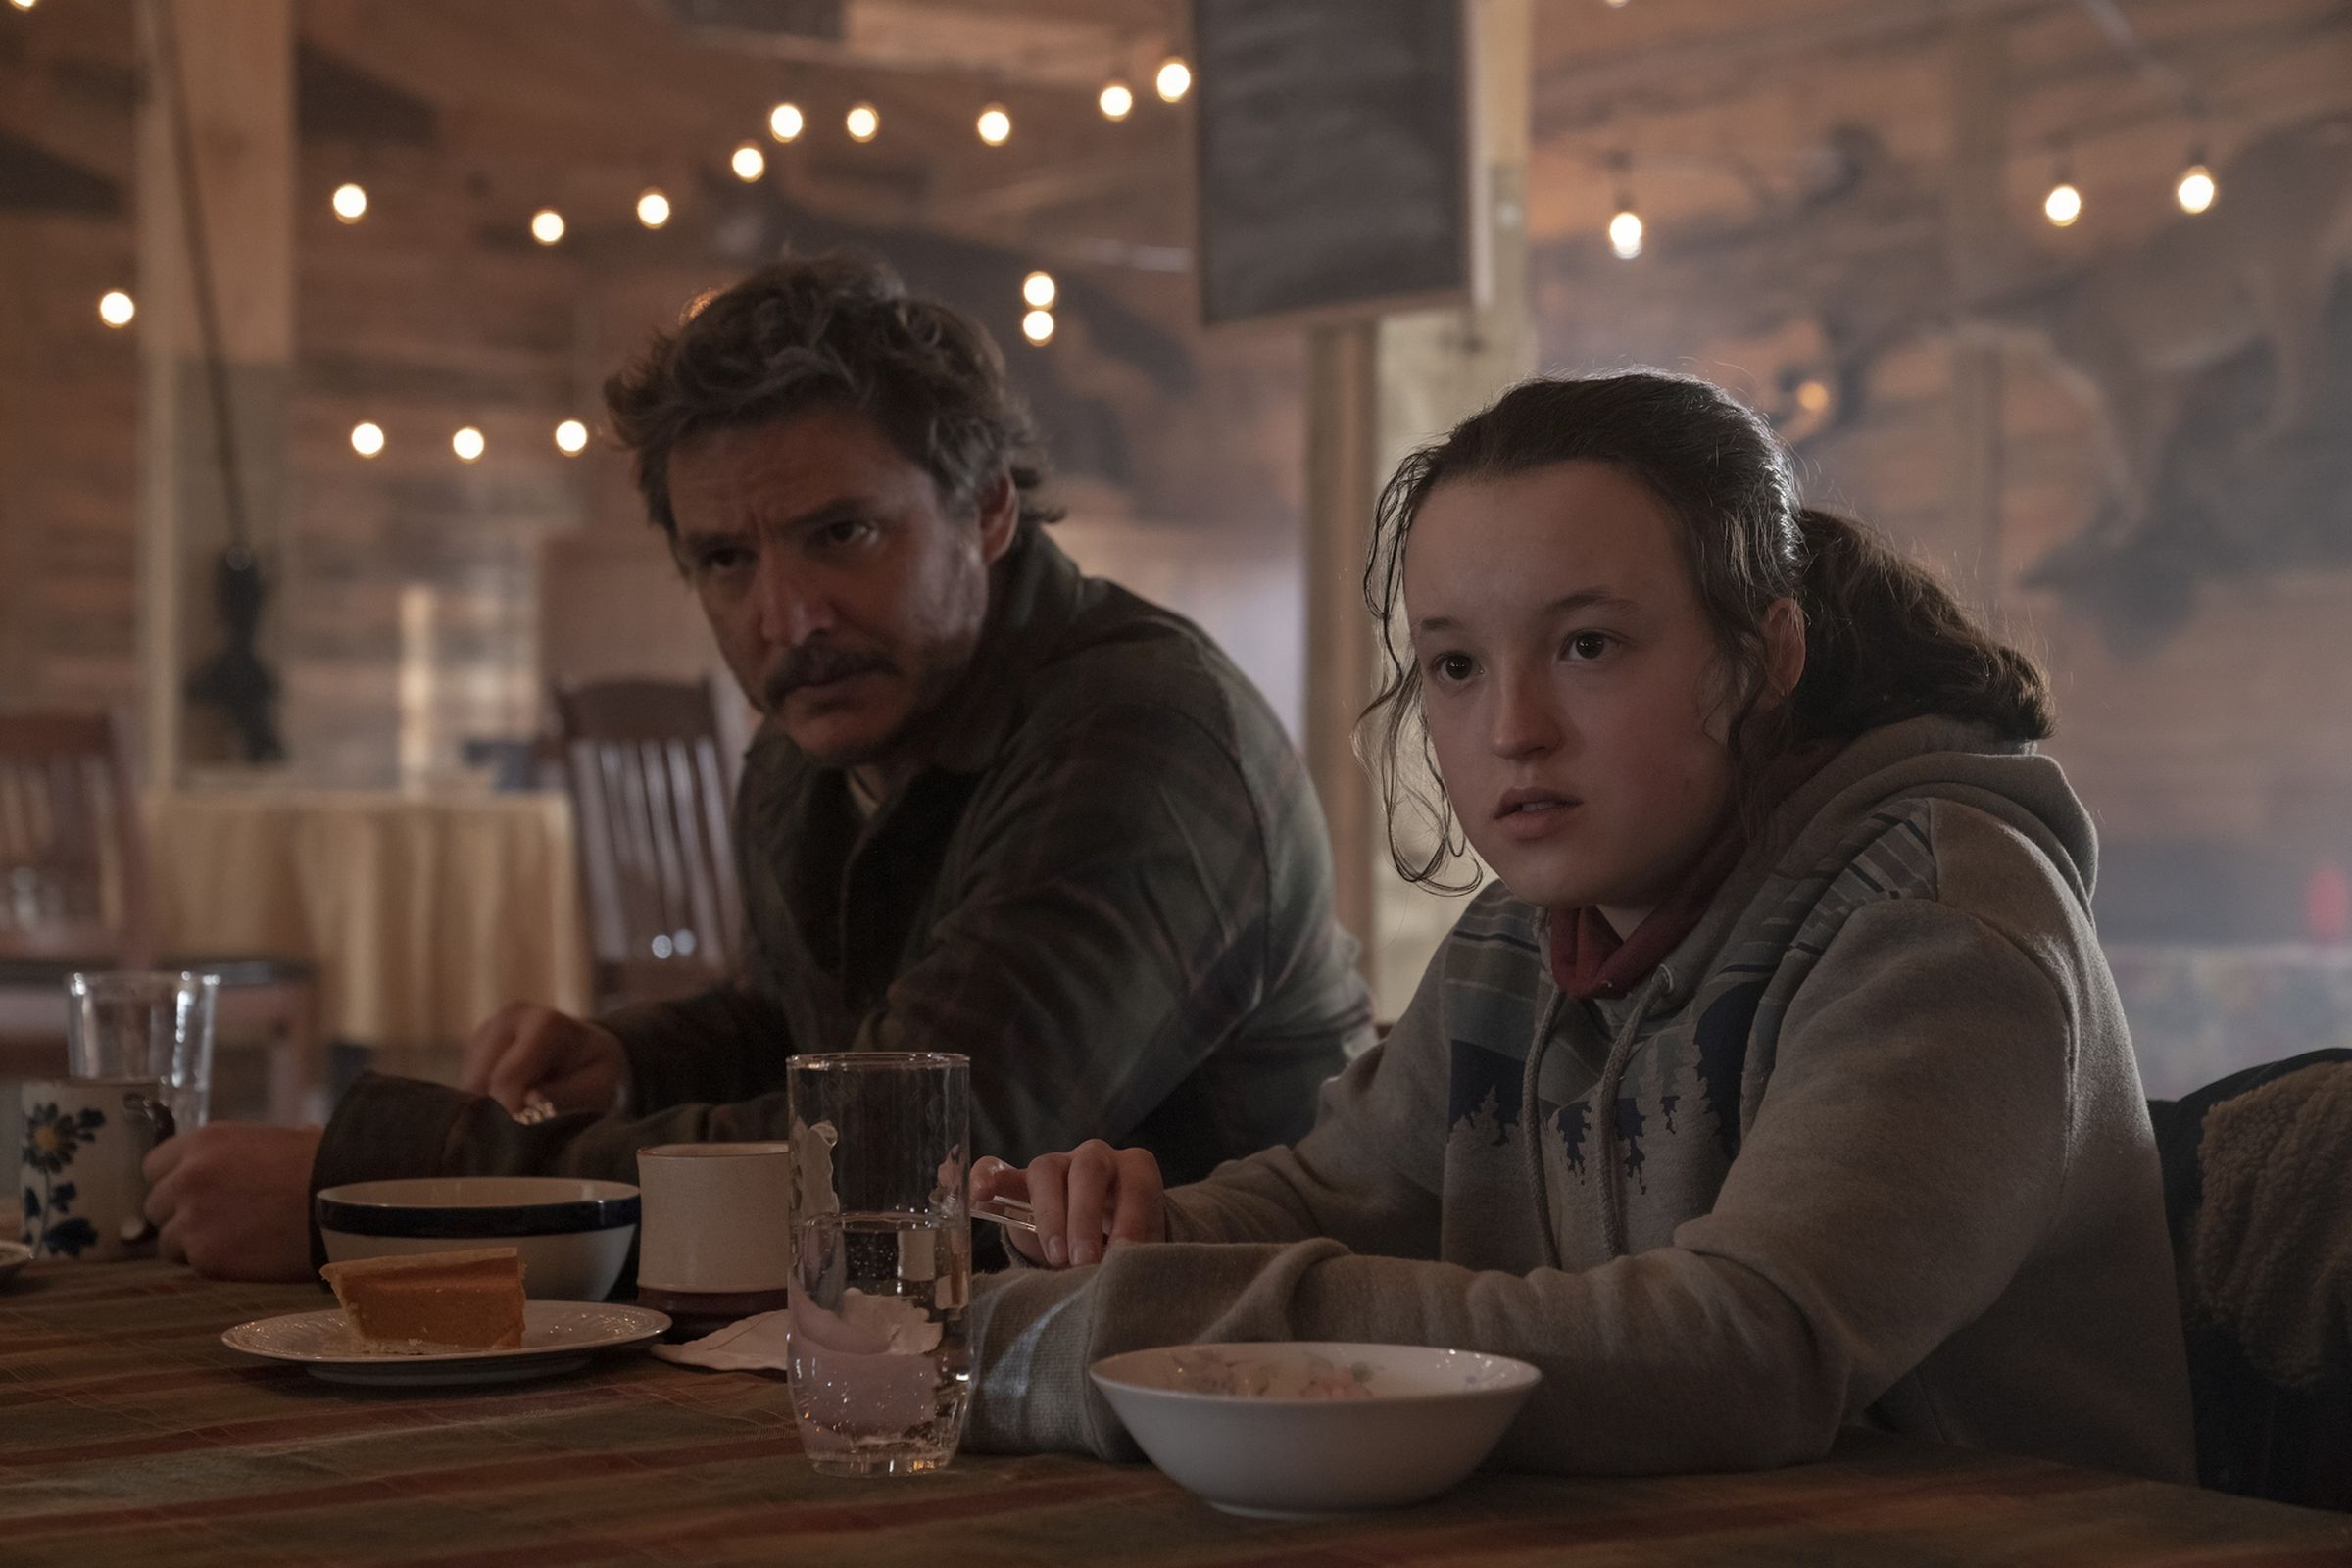 A man wearing a sweater and a girl wearing a hoodie sitting at a table eating breakfast.